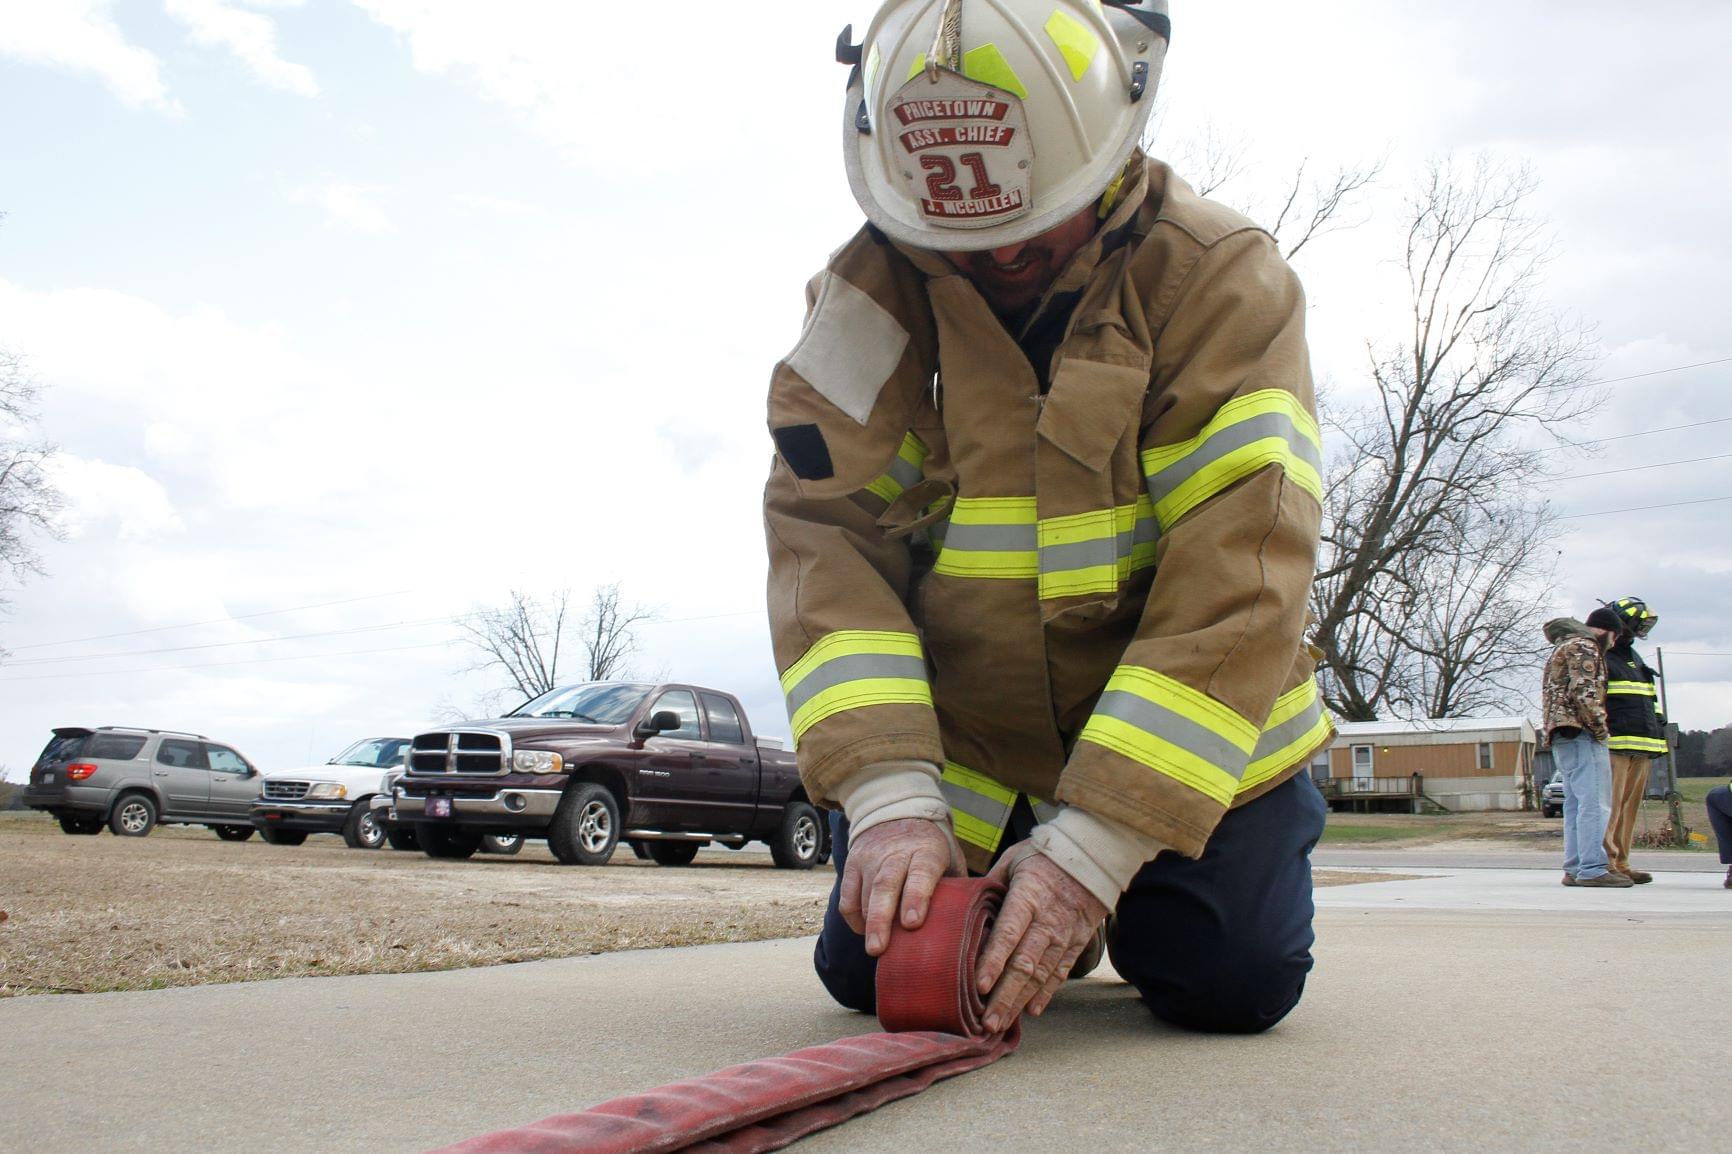 Pricetown Firefighters Spend Weekend Training (PHOTO GALLERY)